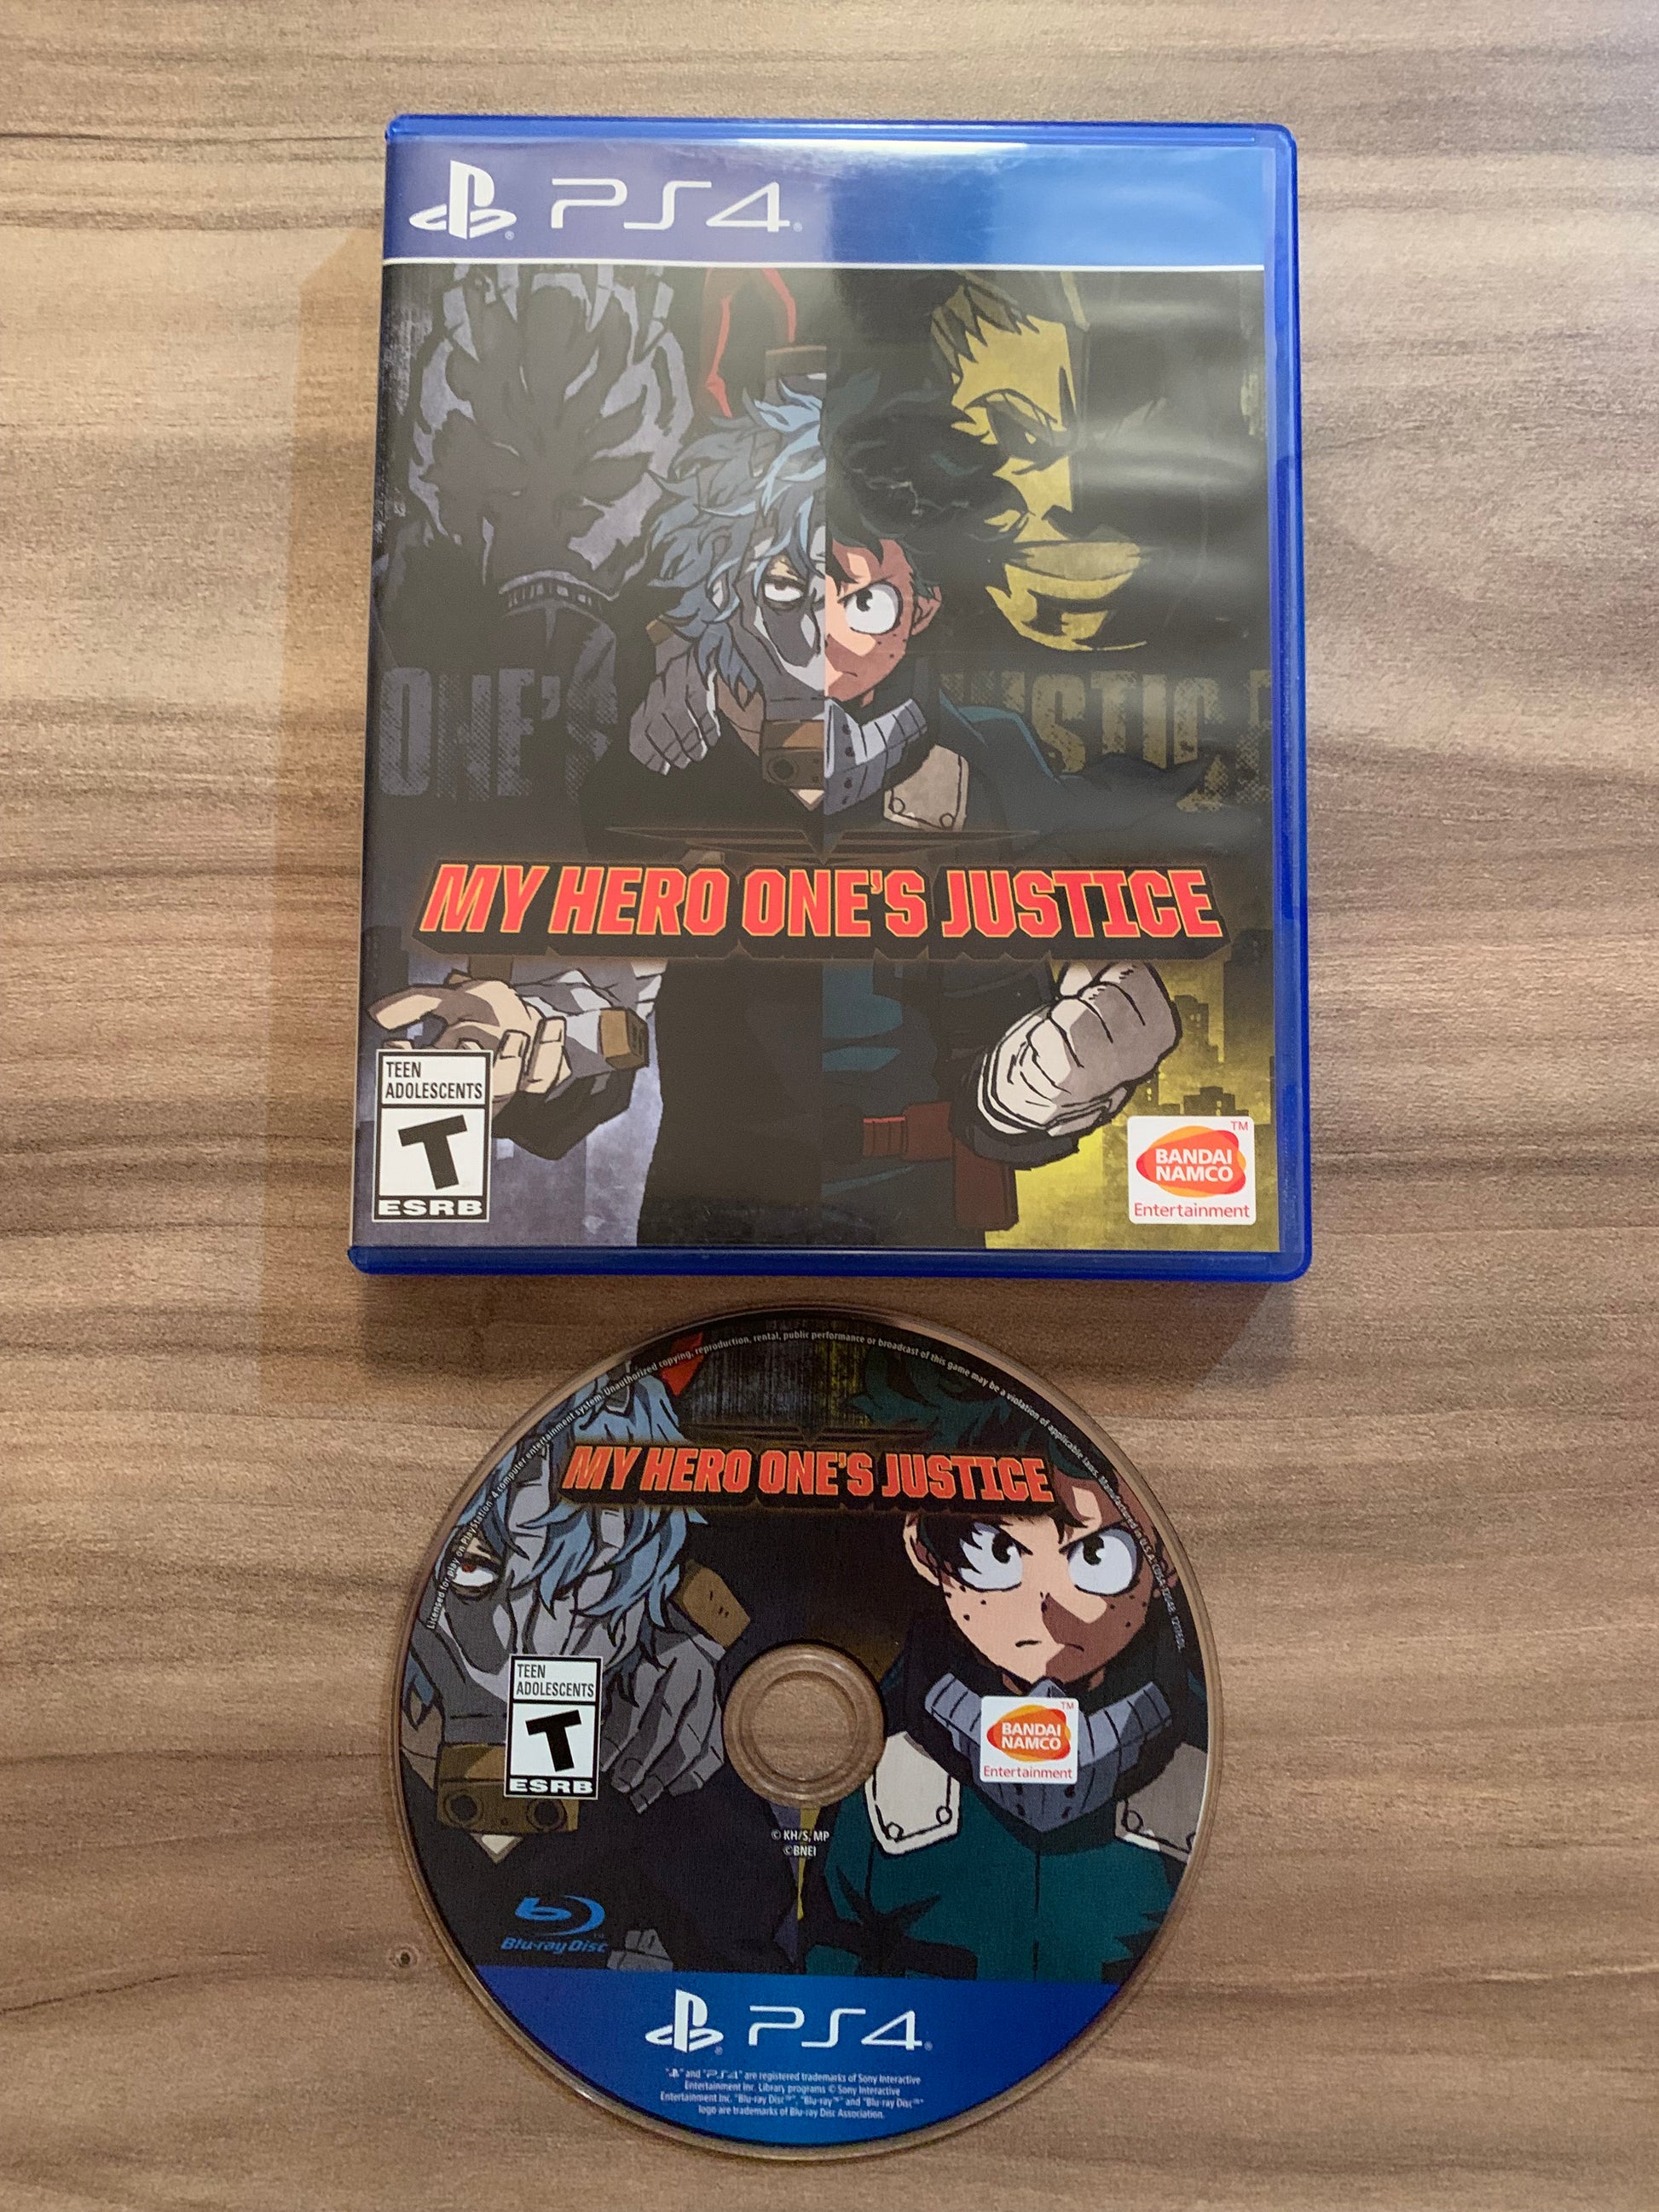 PiXEL-RETRO.COM : SONY PLAYSTATION 4 (PS4) COMPLETE CIB BOX MANUAL GAME NTSC MY HERO ONE'S JUSTICE